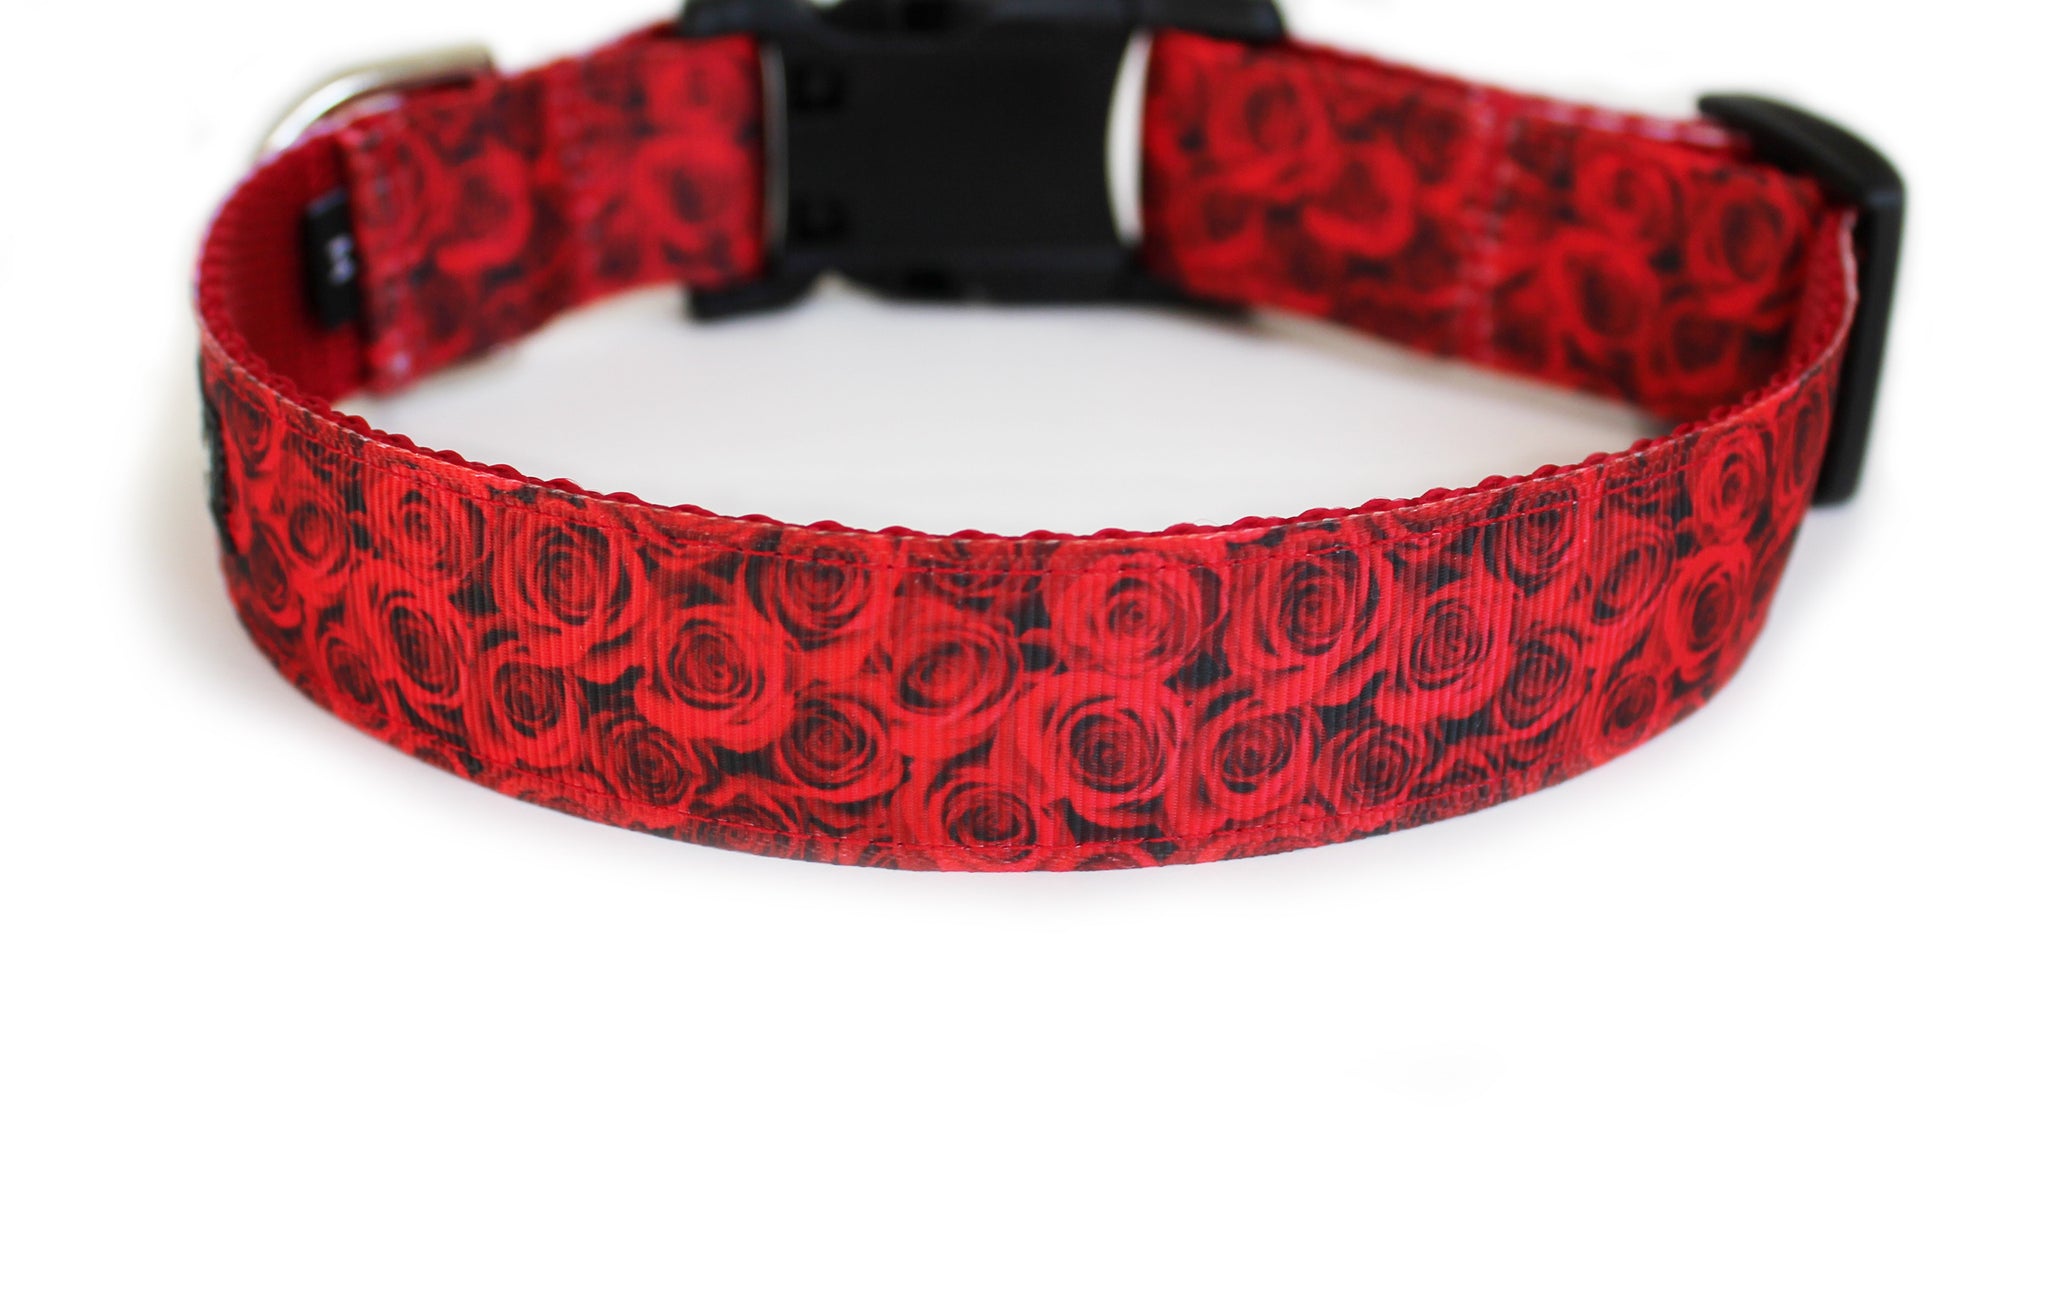 Red Roses Dog Collar - You Had Me at Woof